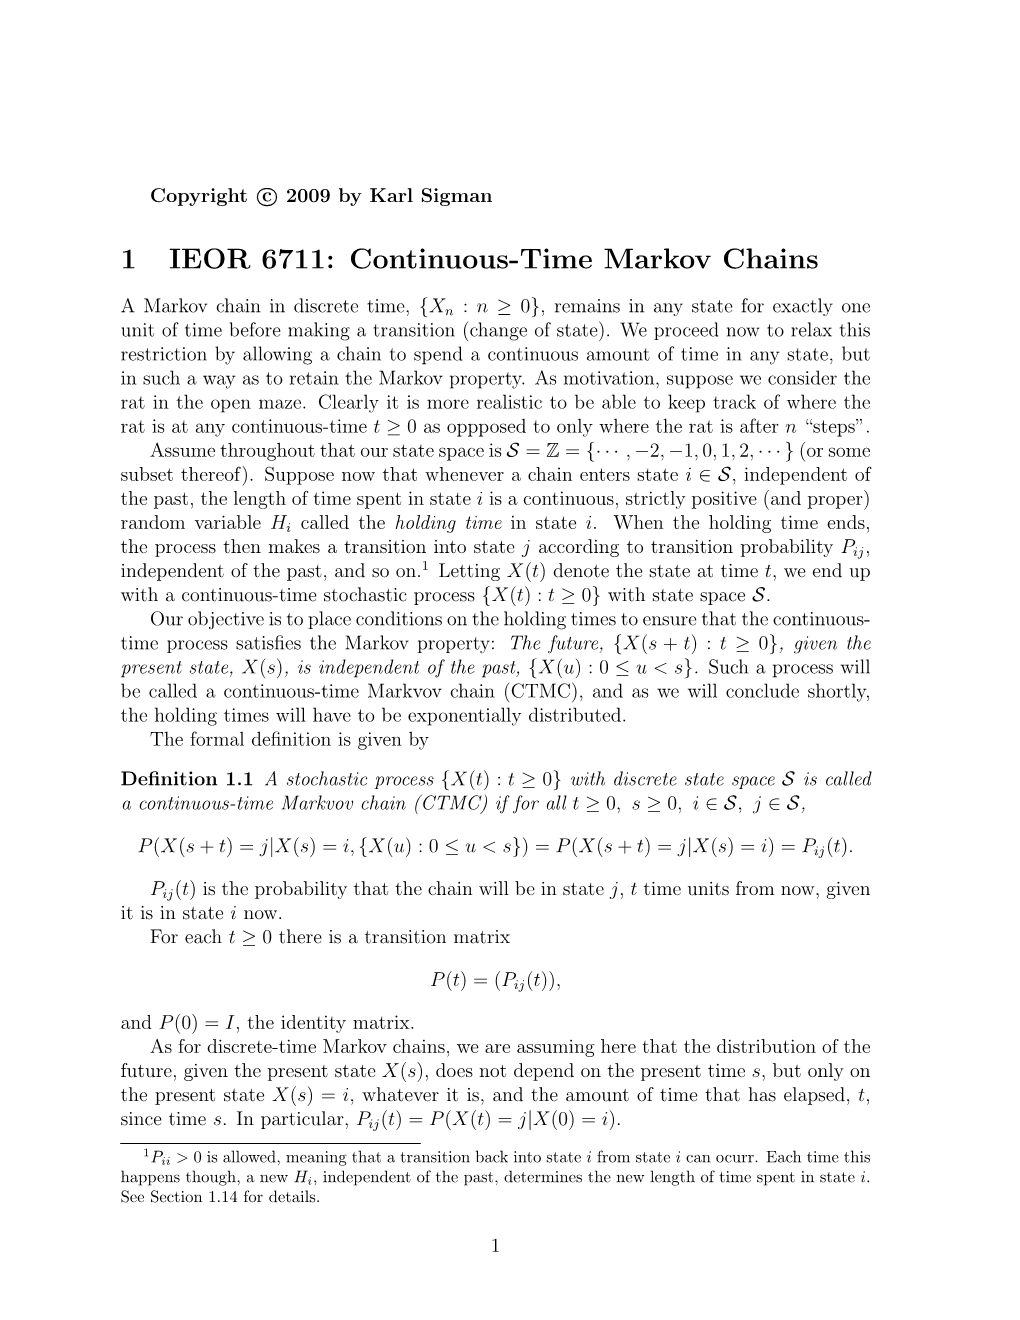 1 IEOR 6711: Continuous-Time Markov Chains